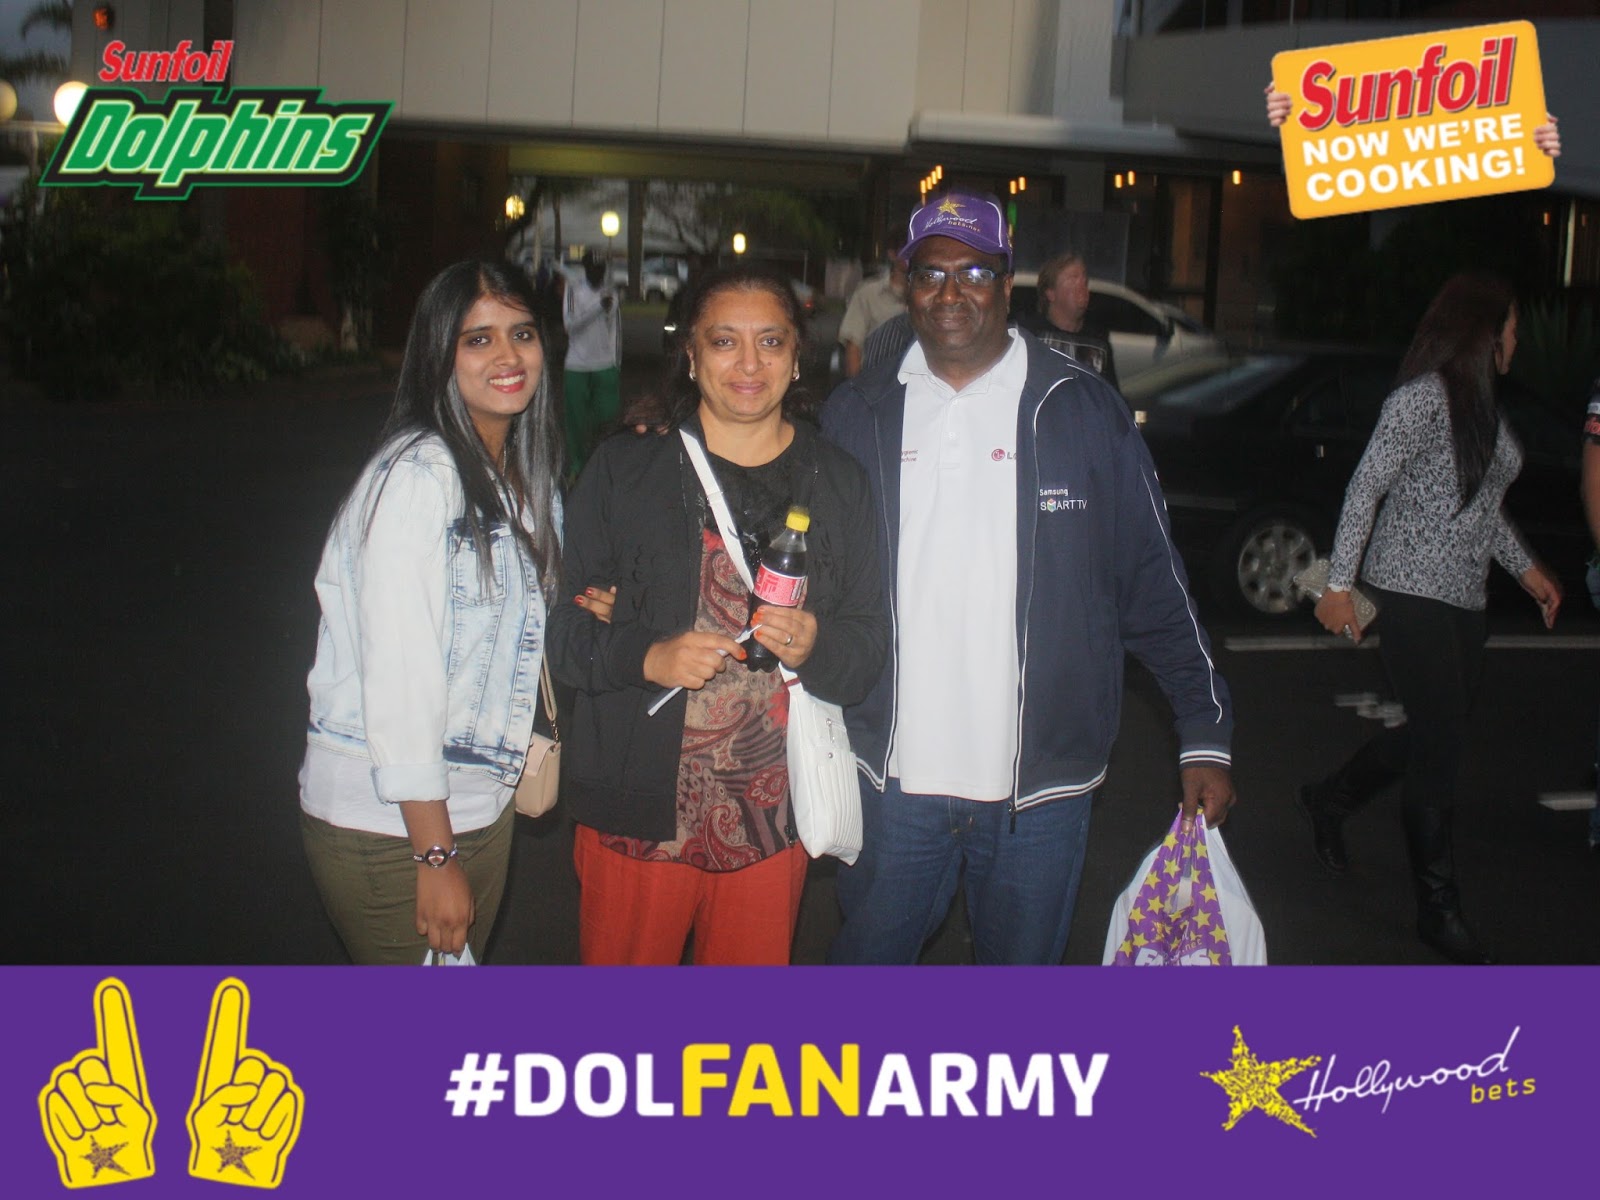 Hollywoodbets Dolfan Army - Sunfoil Dolphins Supporters